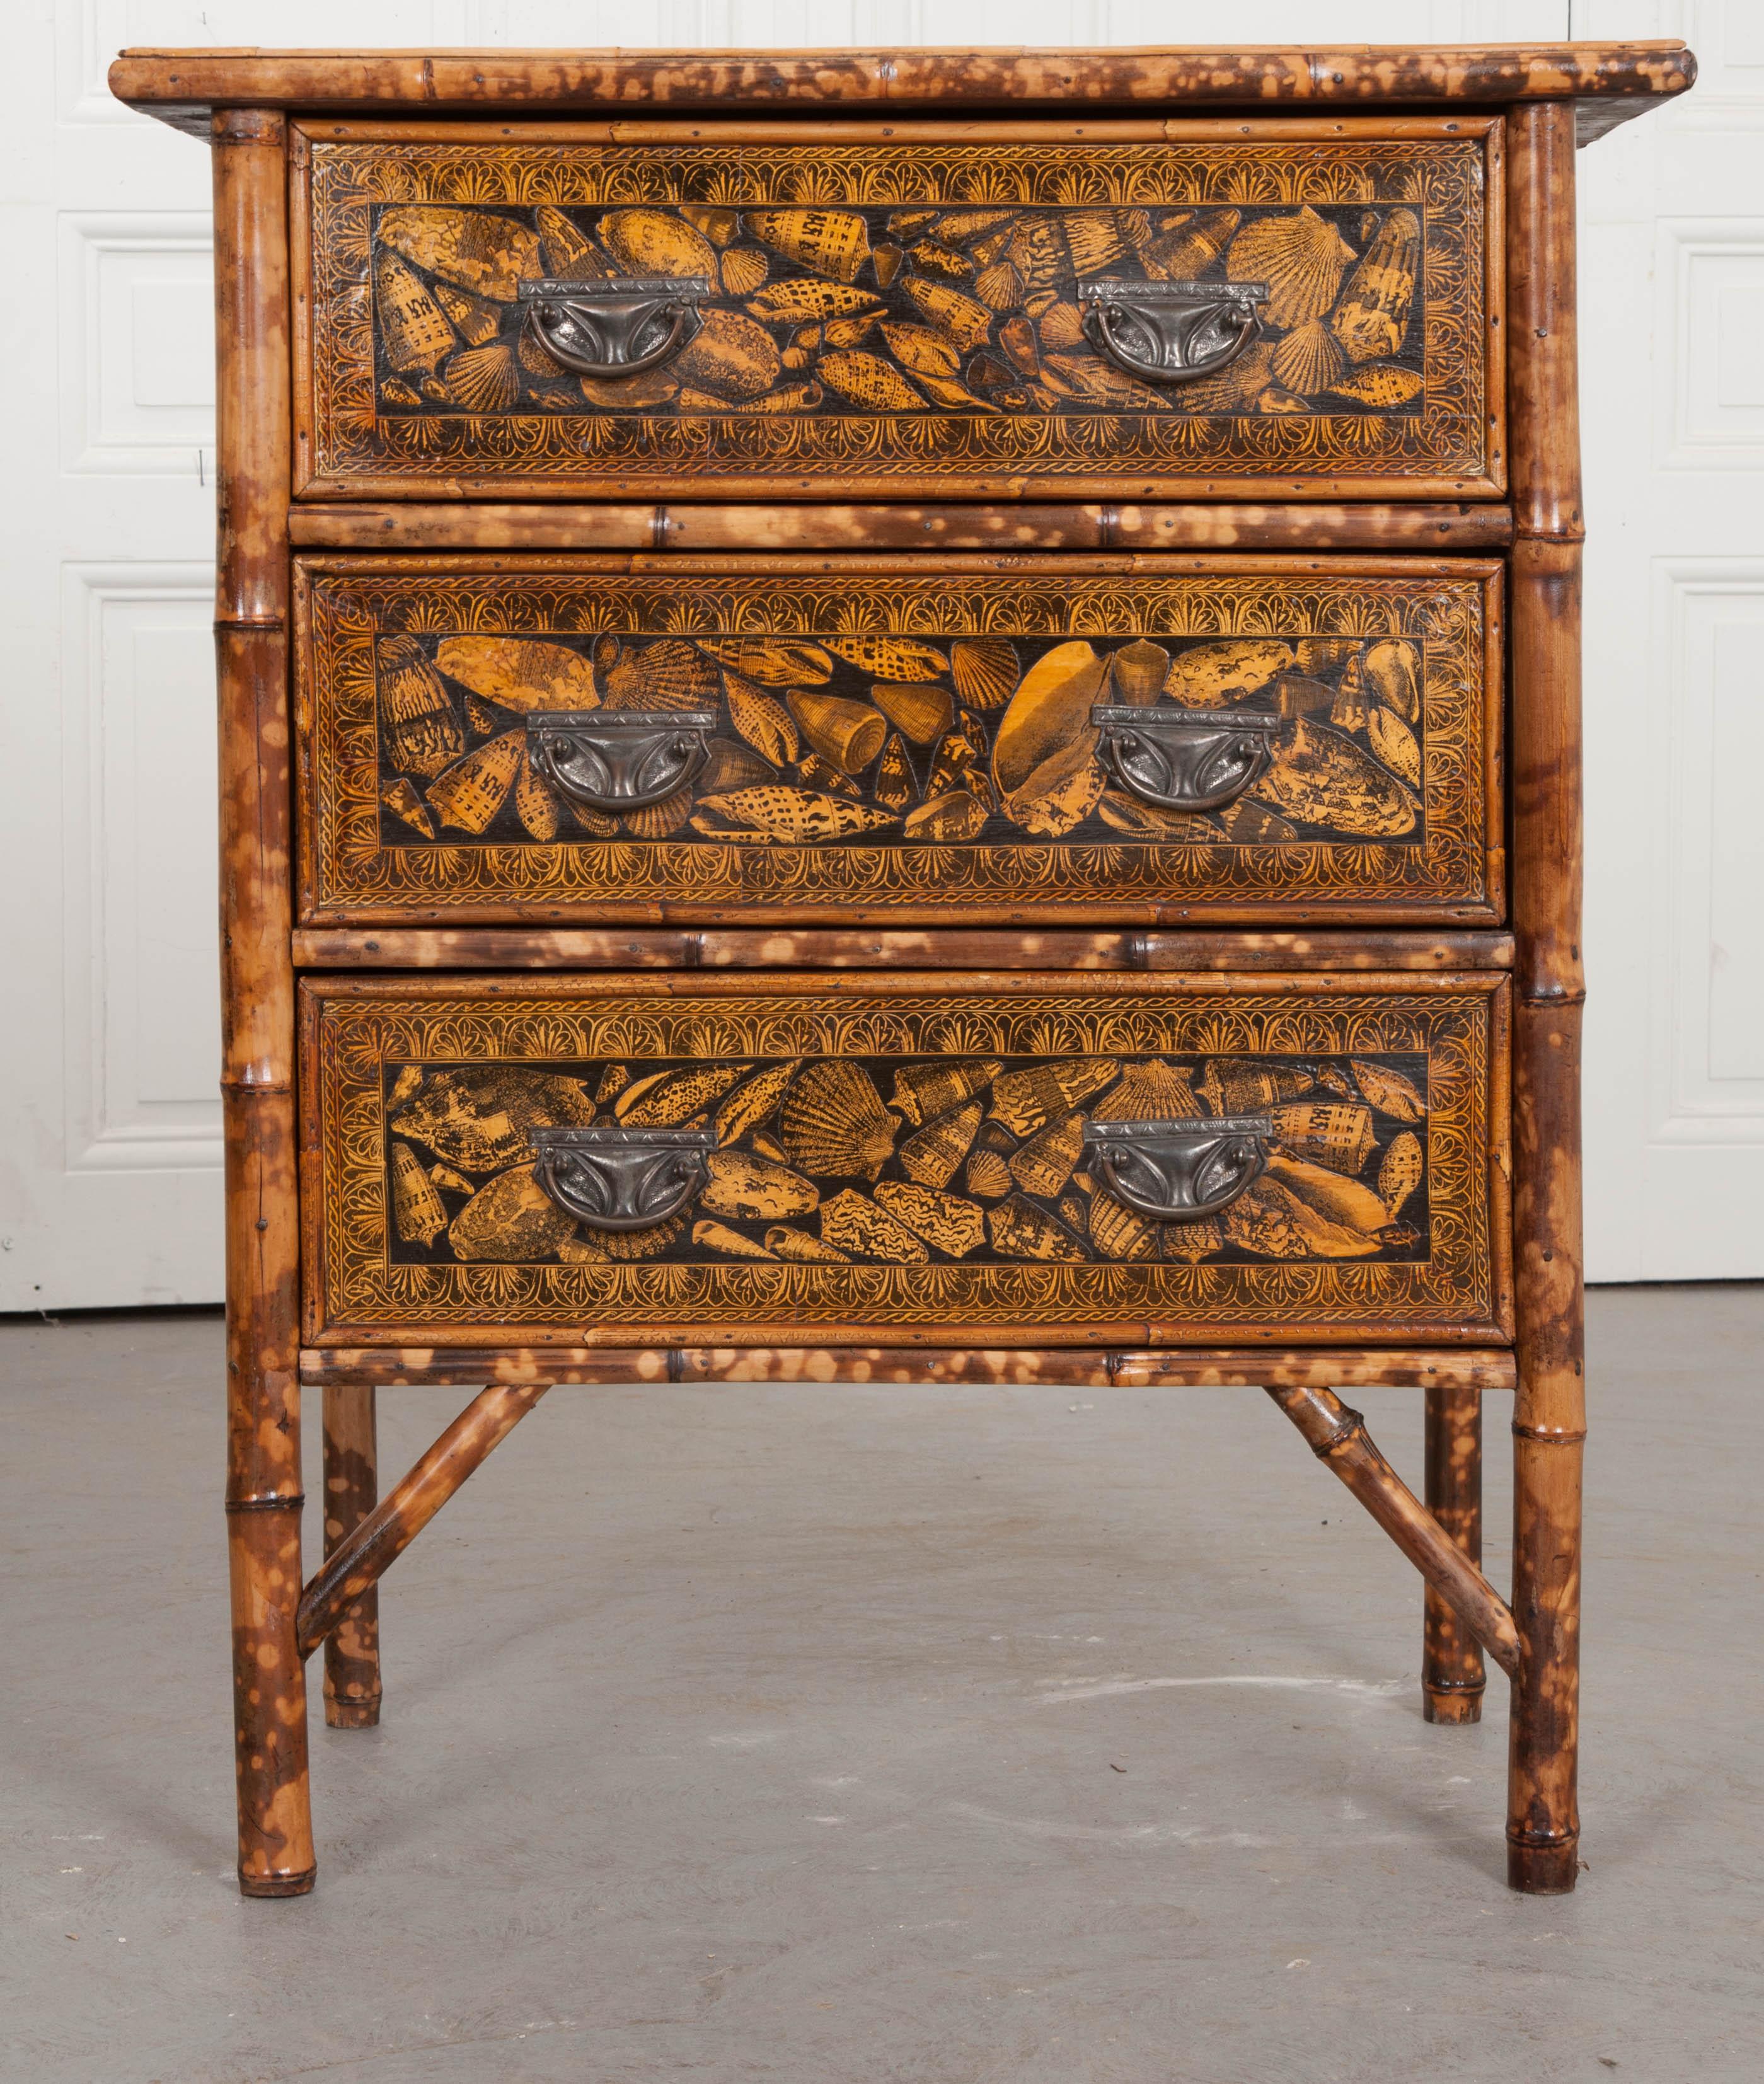 An English three-drawer bamboo chest from the 1890s that has been recently refinished. Where you see decoupage is where seagrass matting once was. The seagrass has been damaged and replaced with this fabulous shell decoupage and interesting